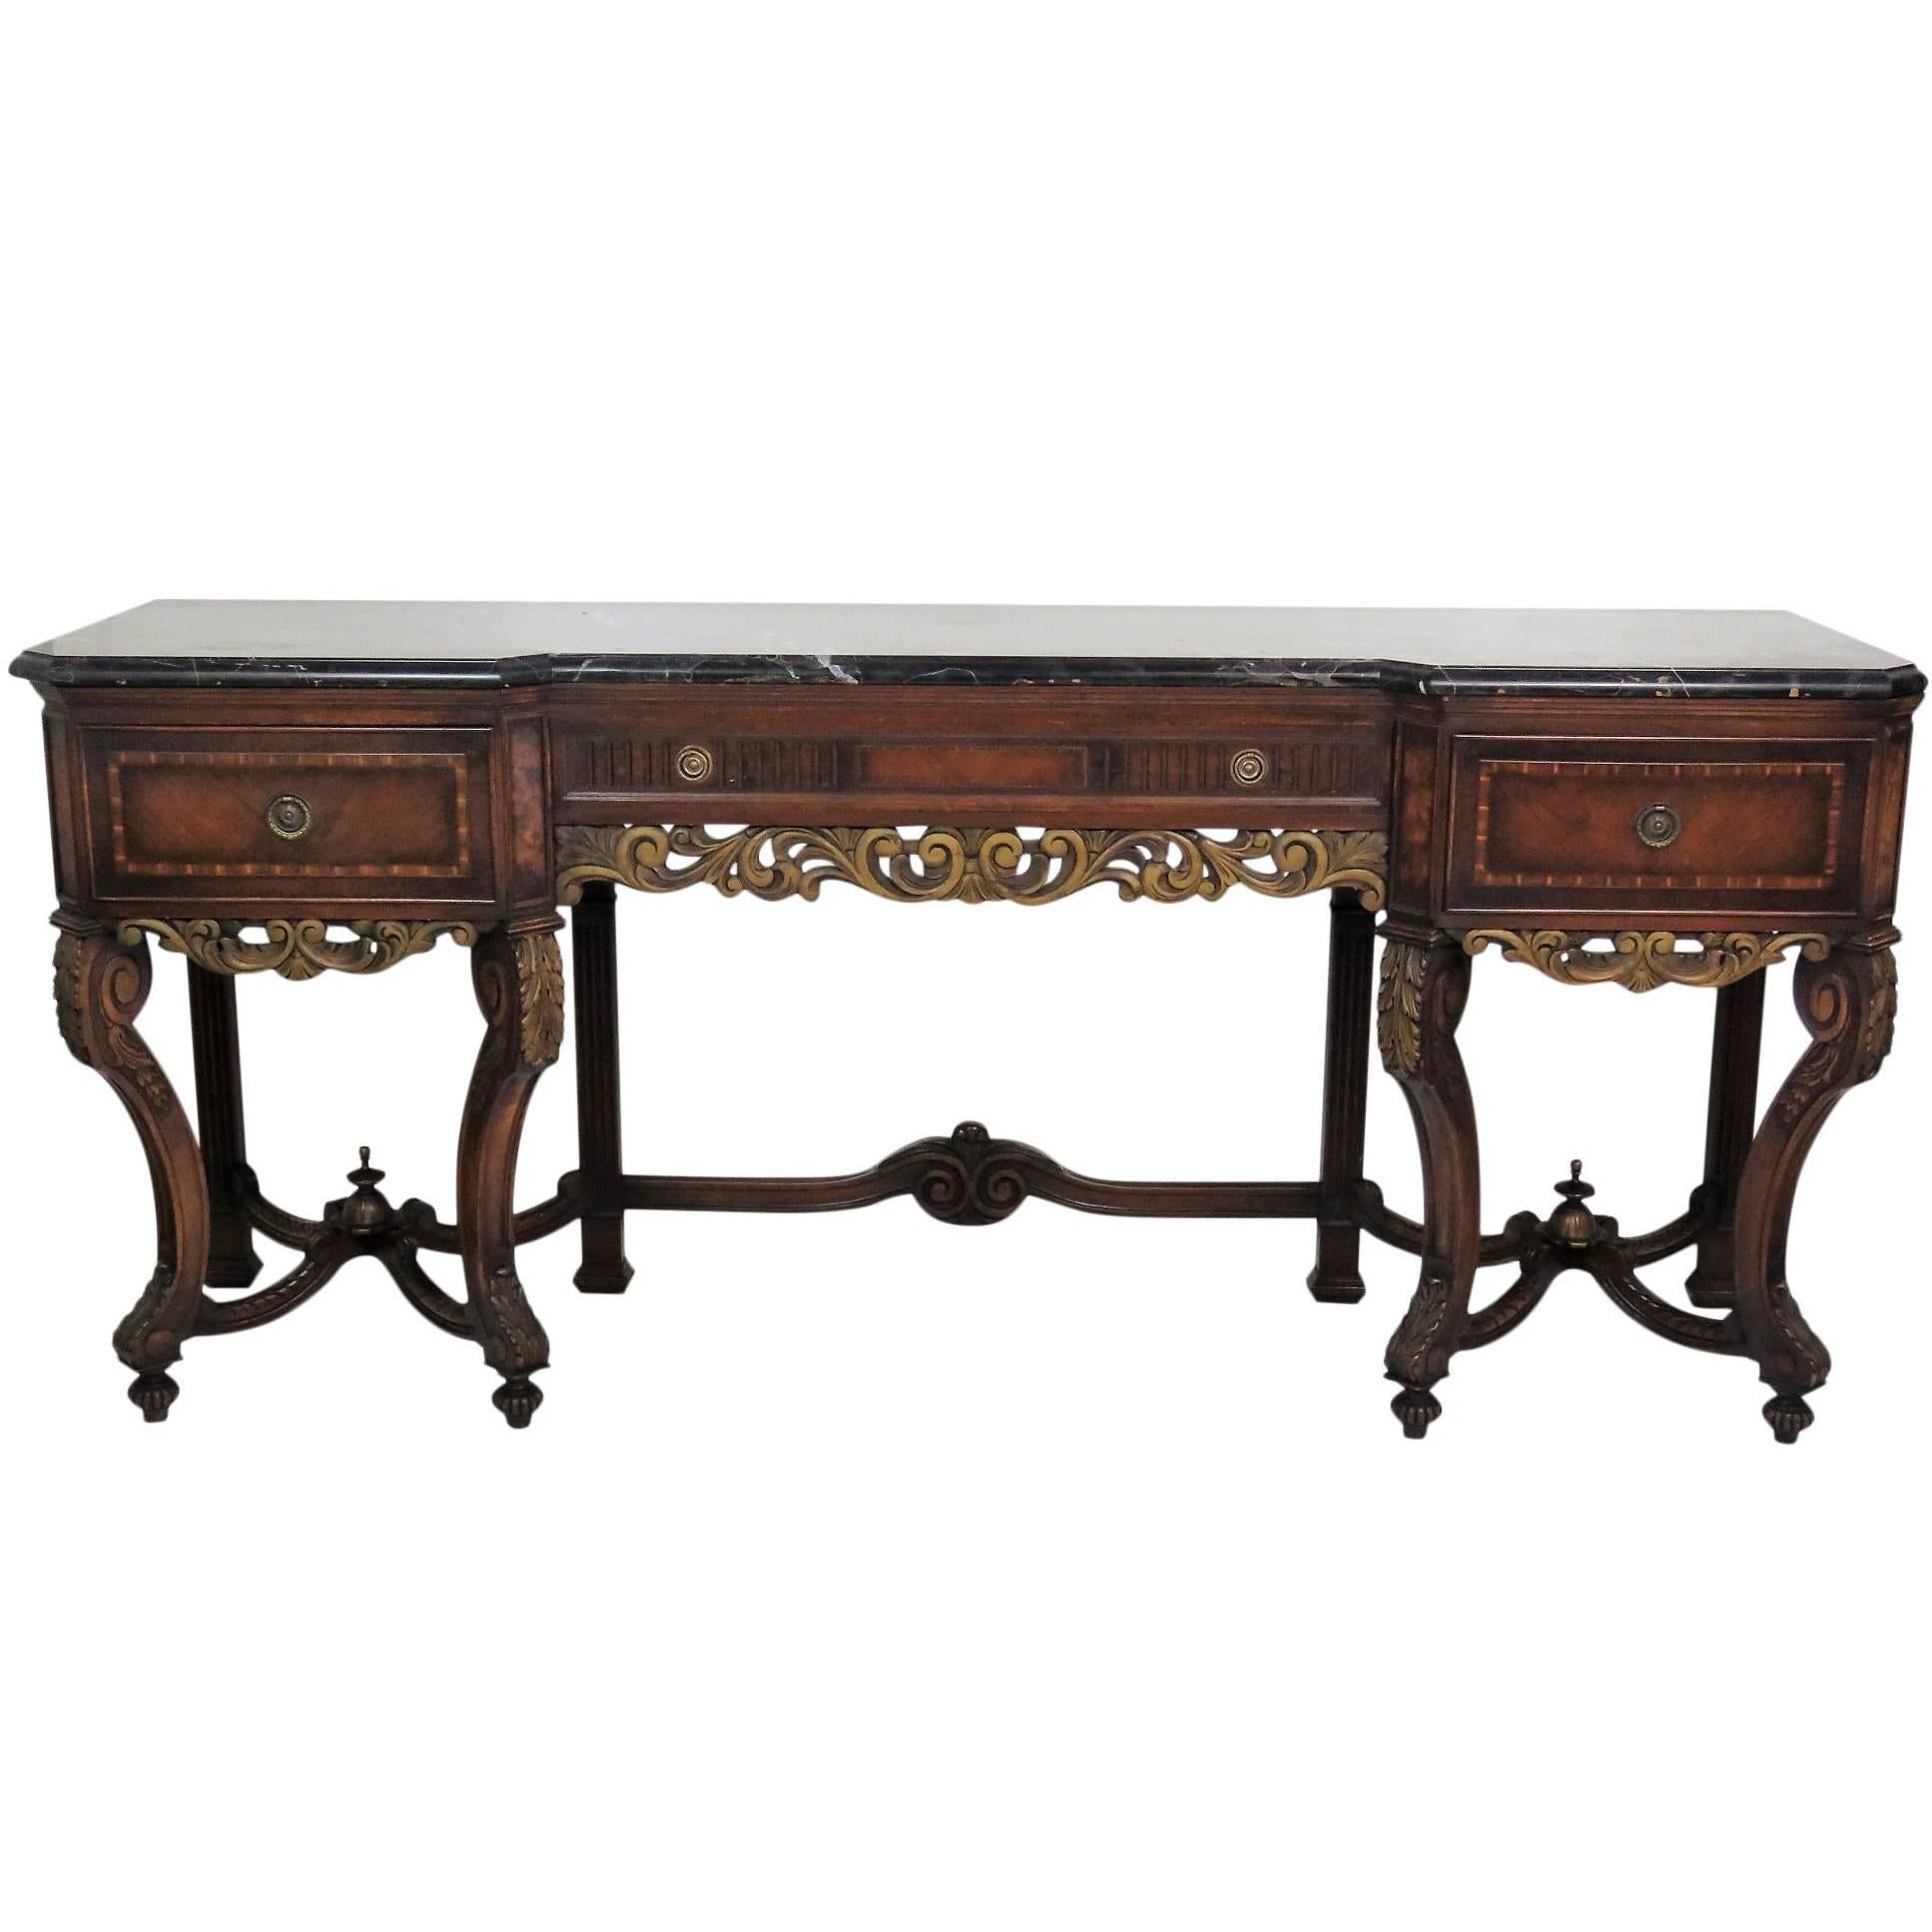 Regency Style Inlaid Marble-Top Console